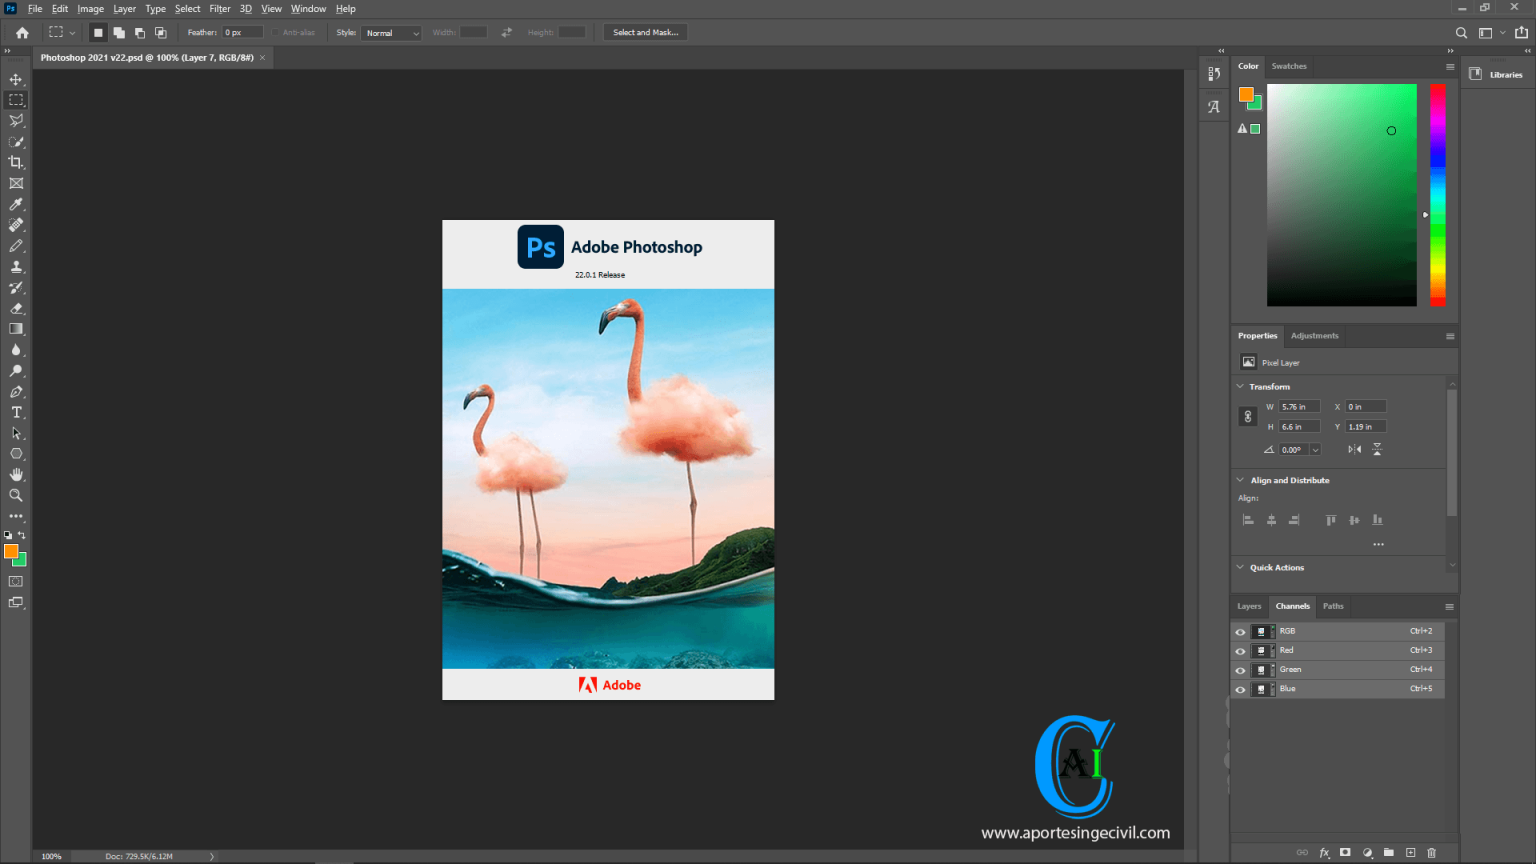 how to download adobe photoshop 2021 for free